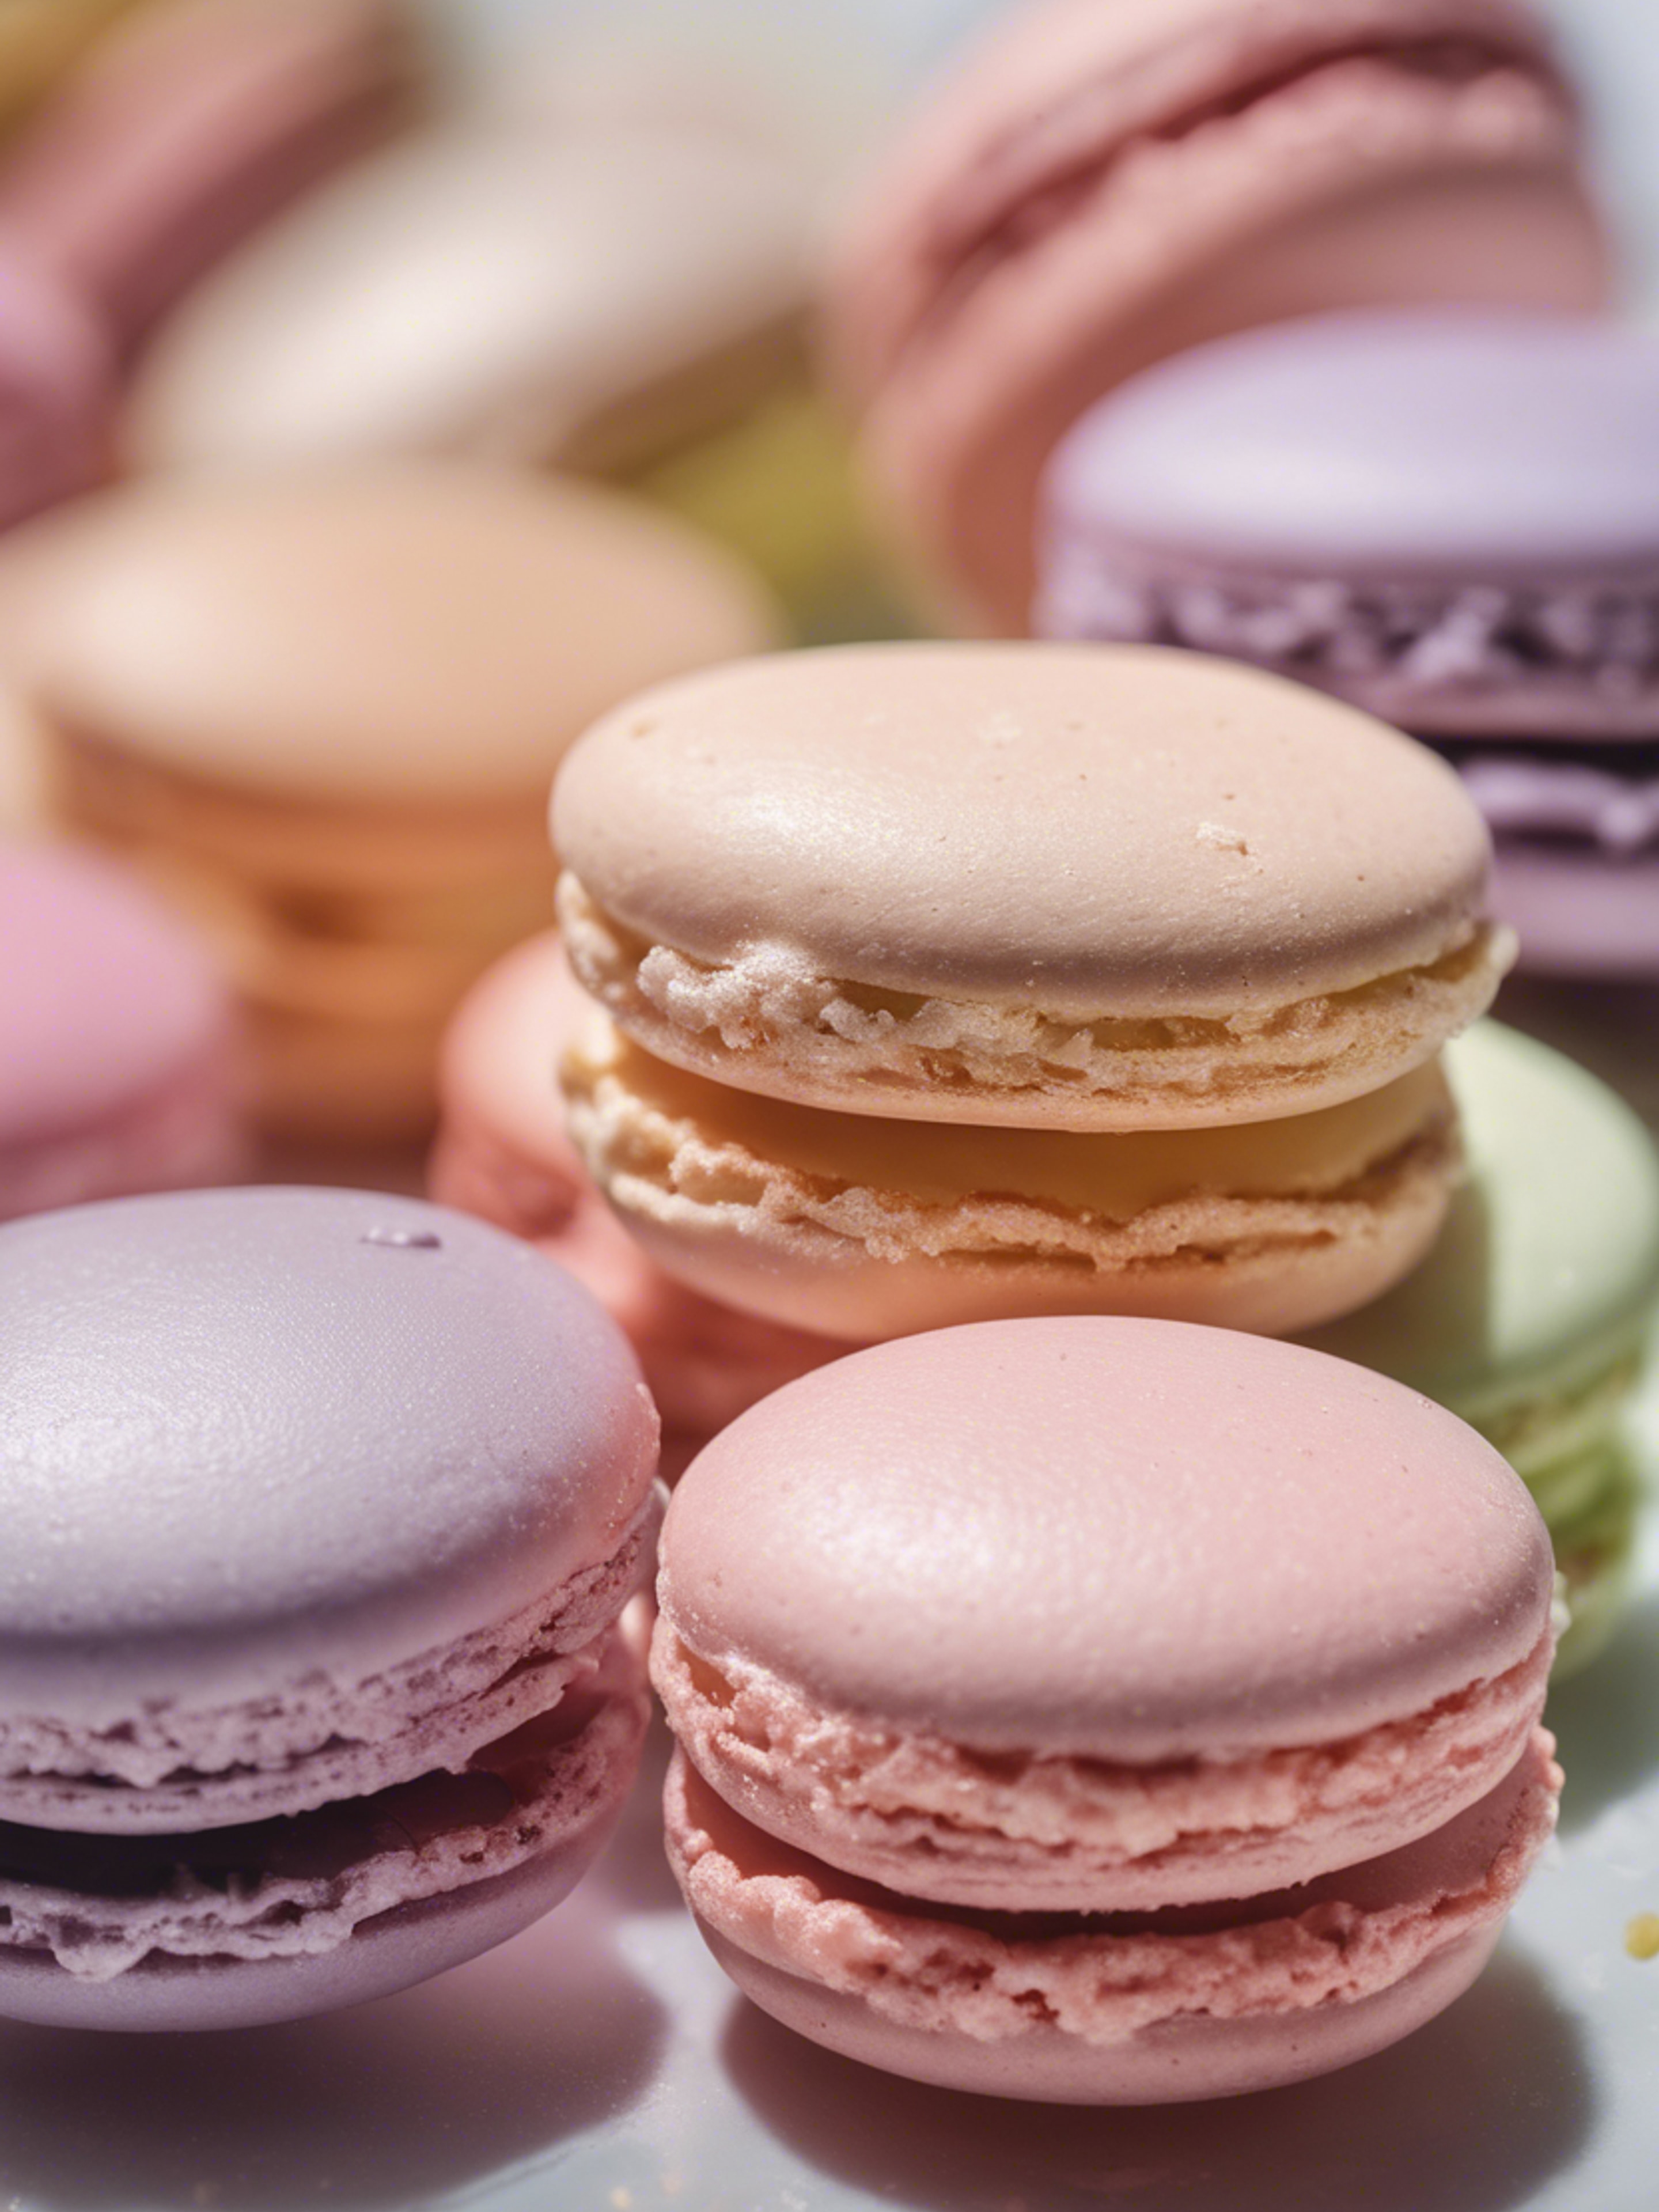 A close-up view of a cool pastel colored macaron making process. Шпалери[347d58695ee94000a1fc]